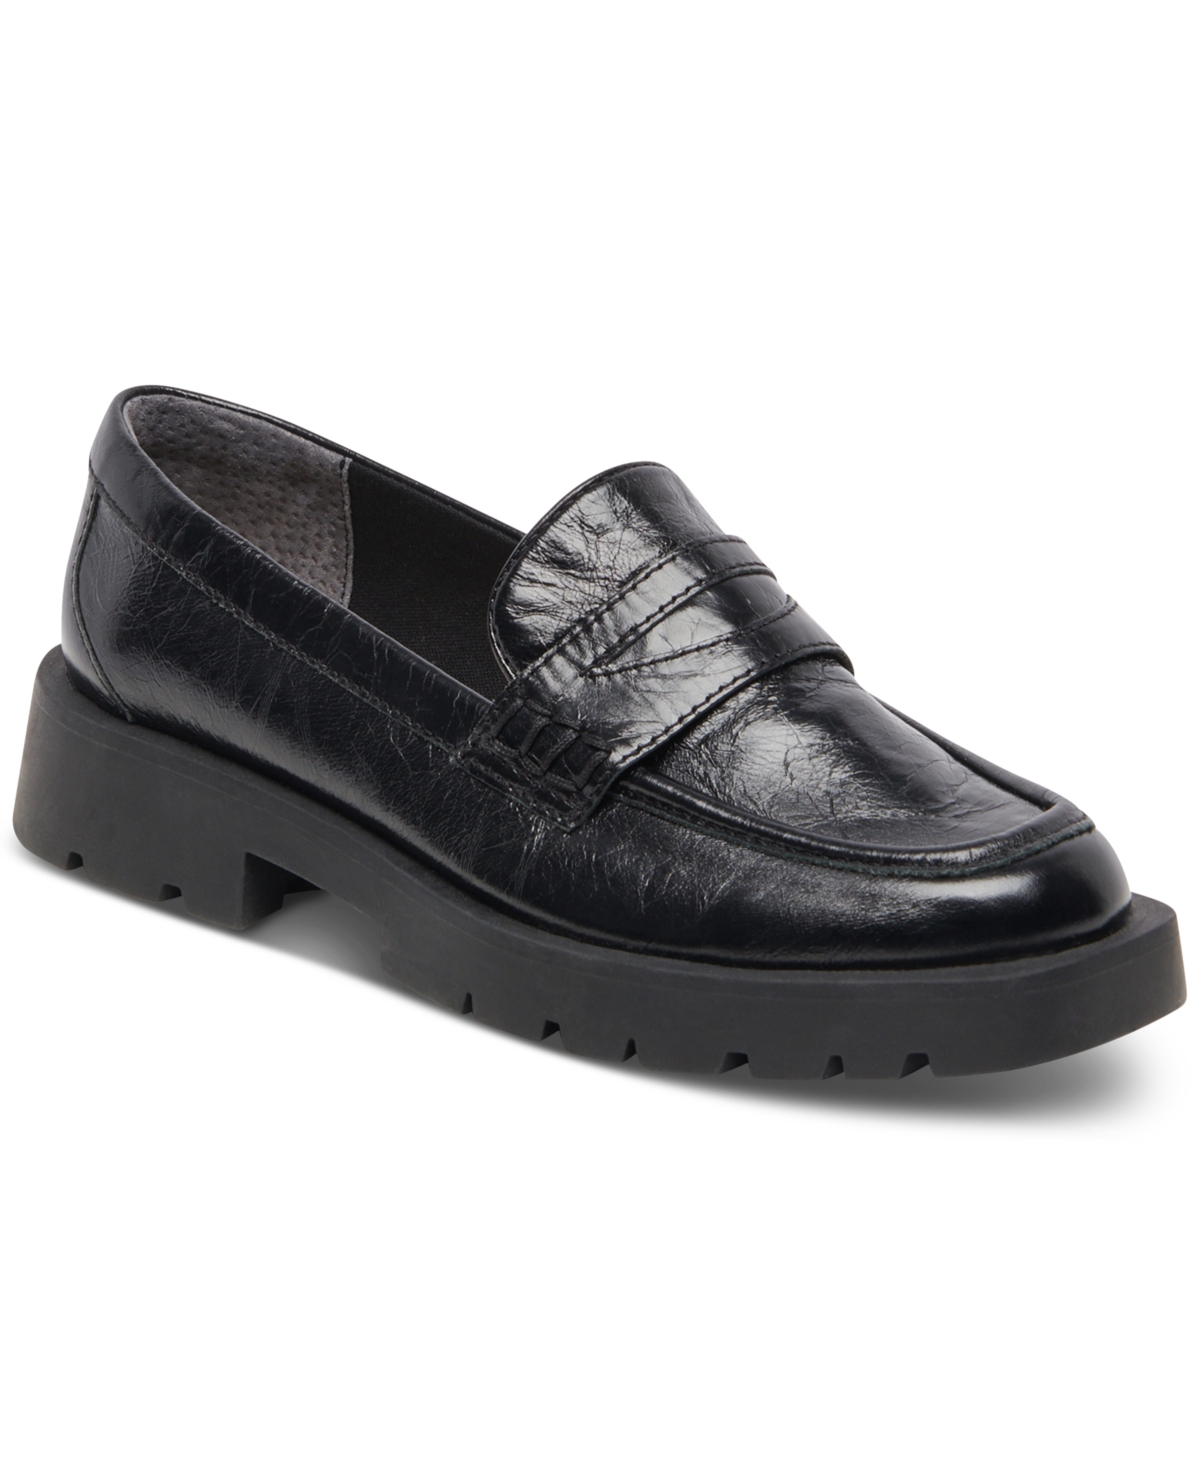 DOLCE VITA WOMEN'S ELIAS LUG SOLE TAILORED LOAFER FLATS